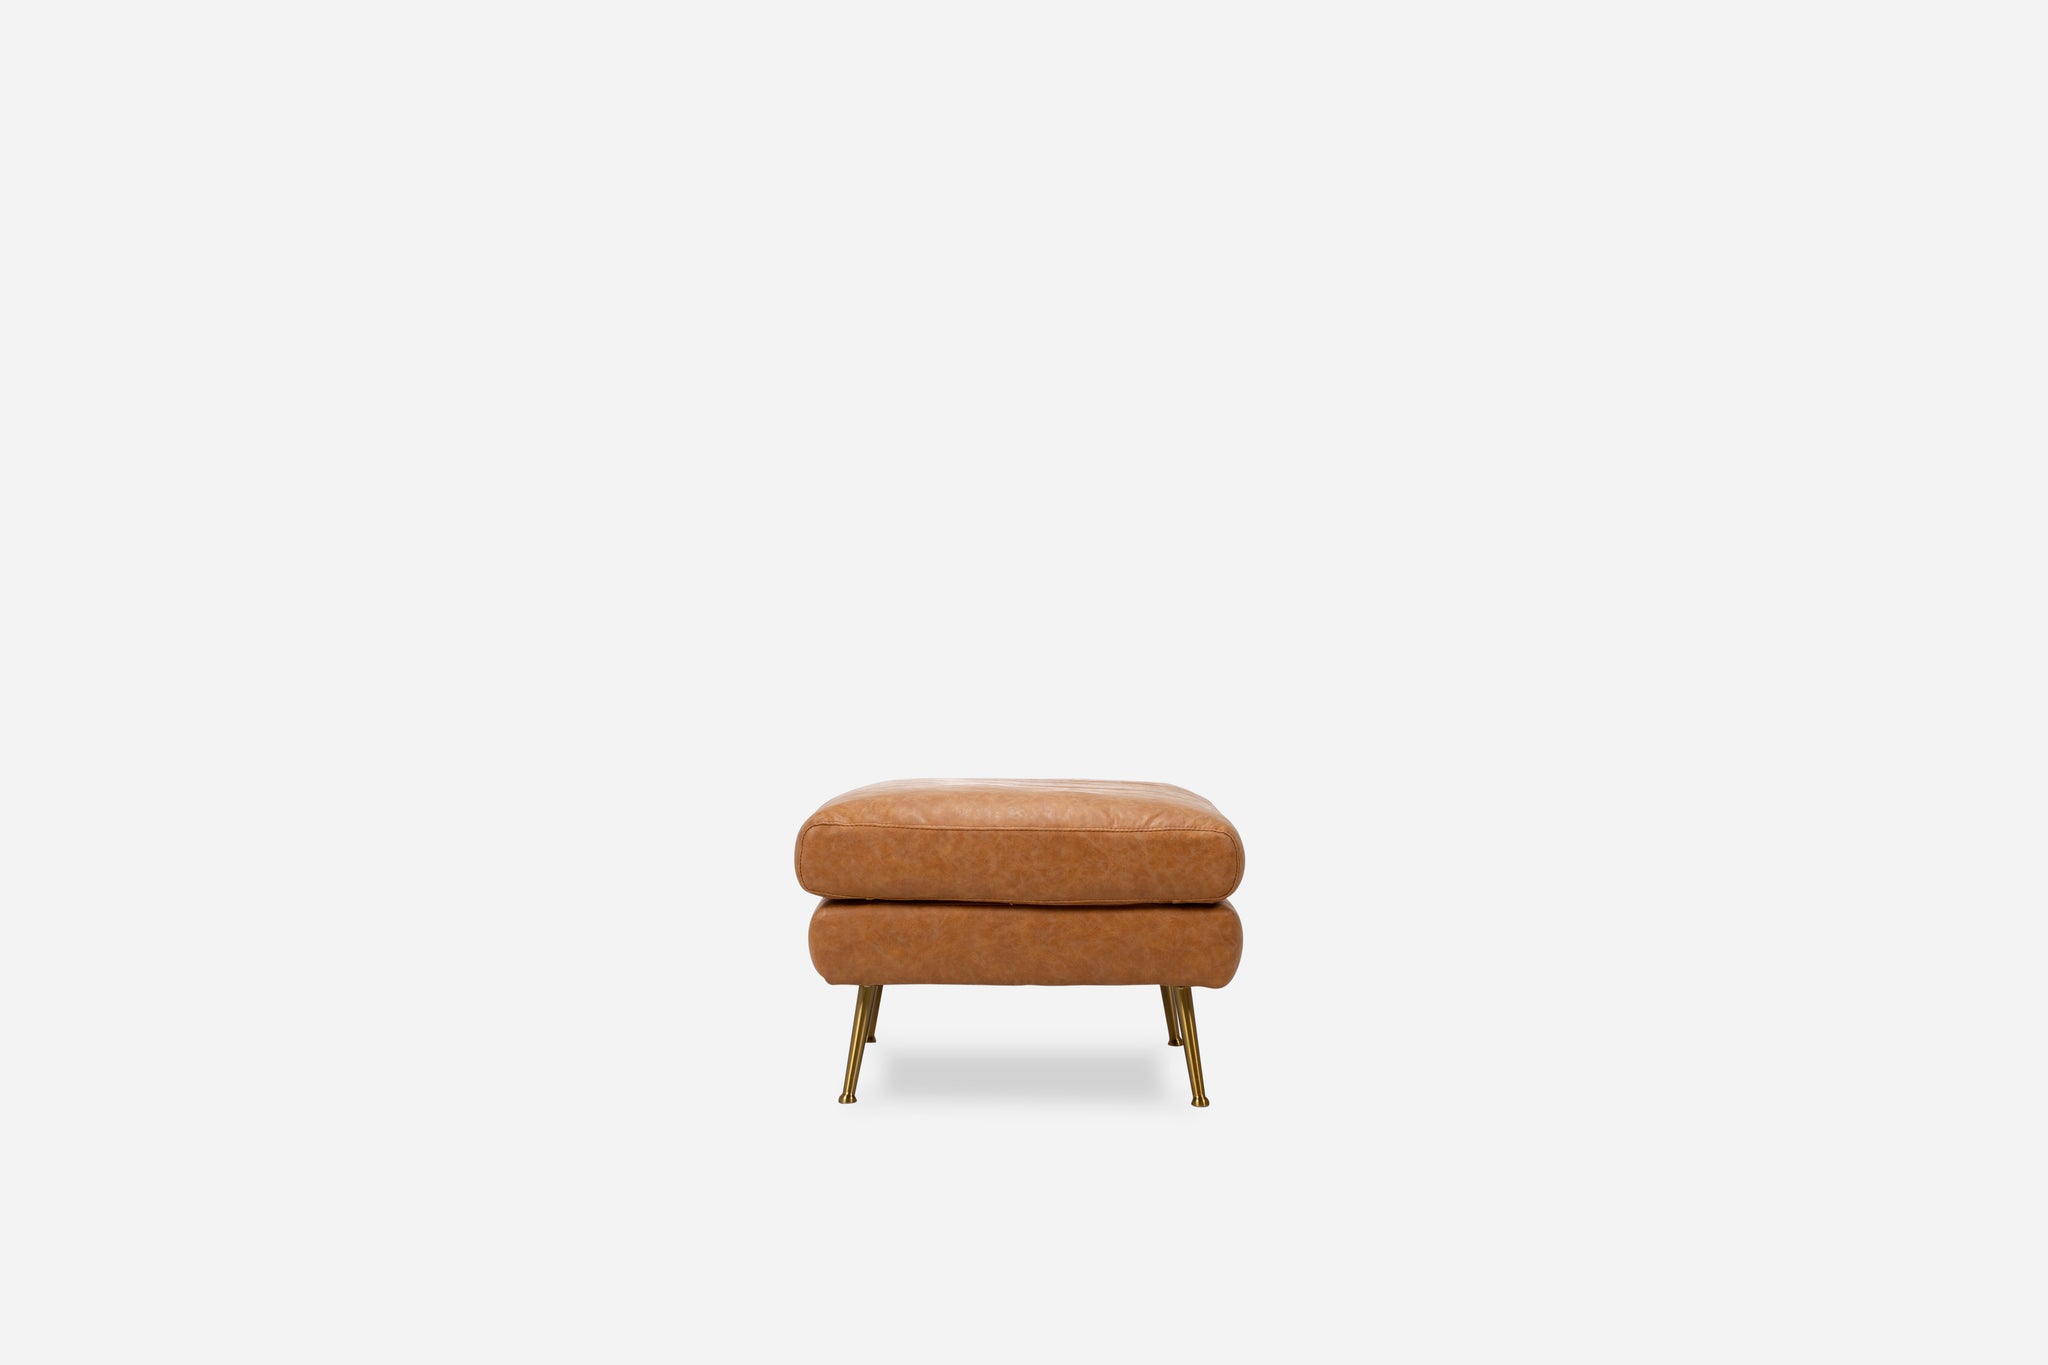 park ottoman shown in distressed vegan leather with gold legs